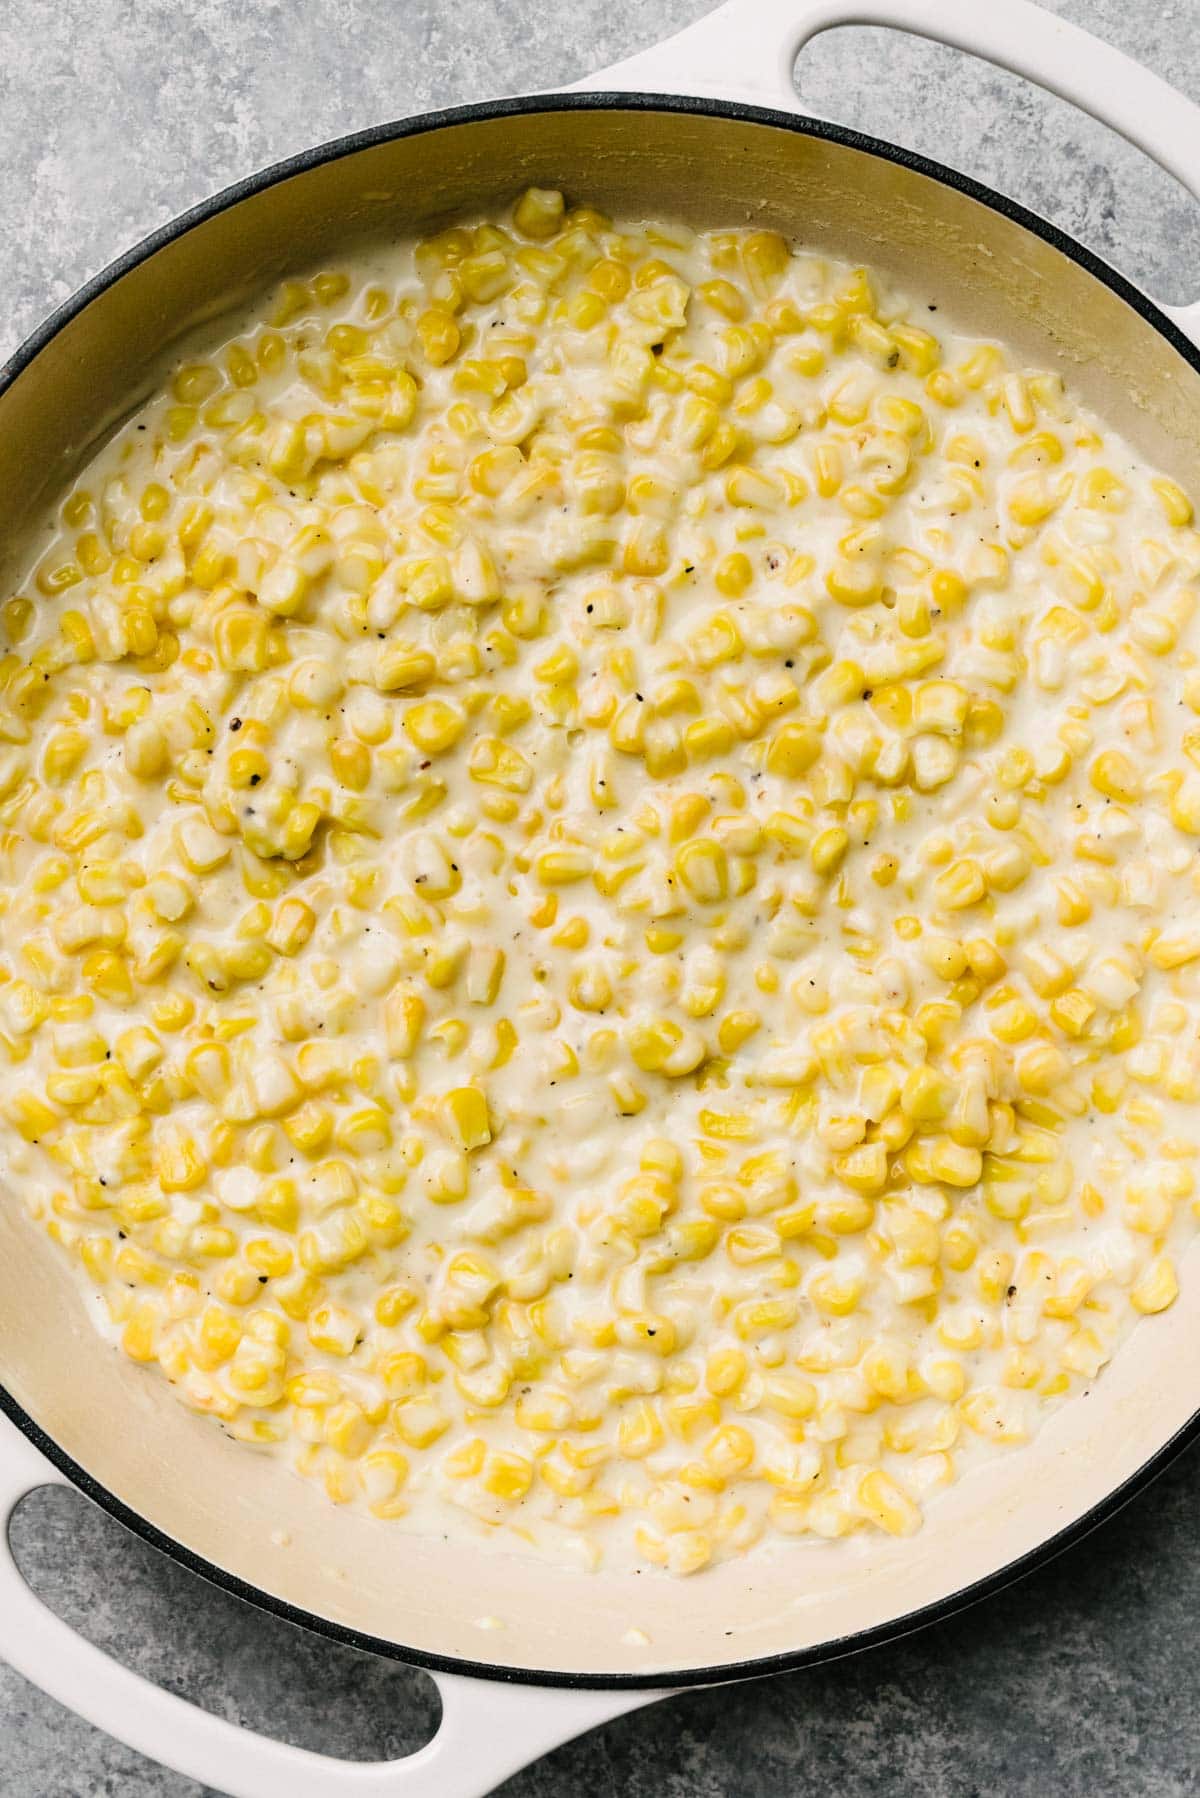 Frozen corn kernels cooked down in a thick cream sauce in a large grey skillet.